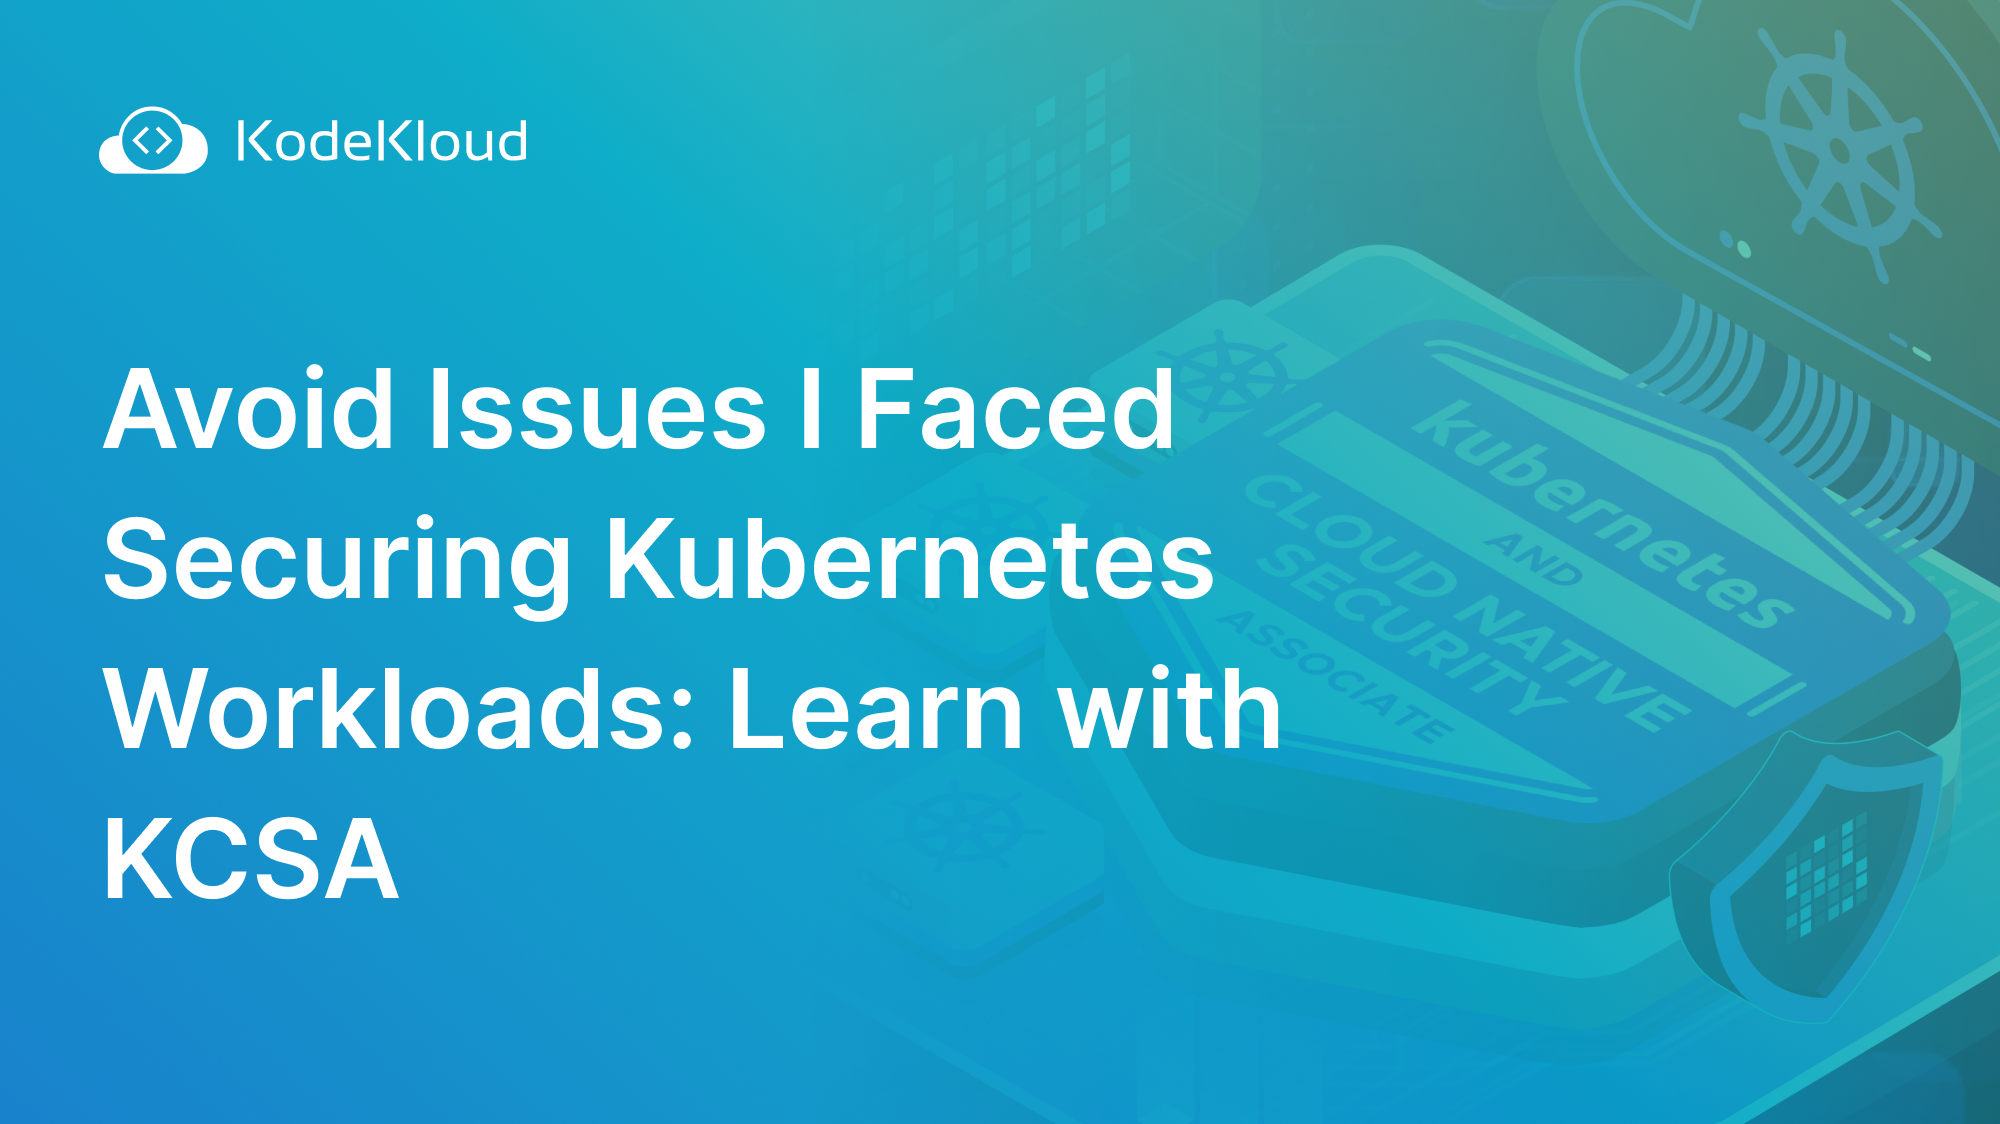 Avoid Issues I Faced Securing Kubernetes Workloads: Learn with KCSA